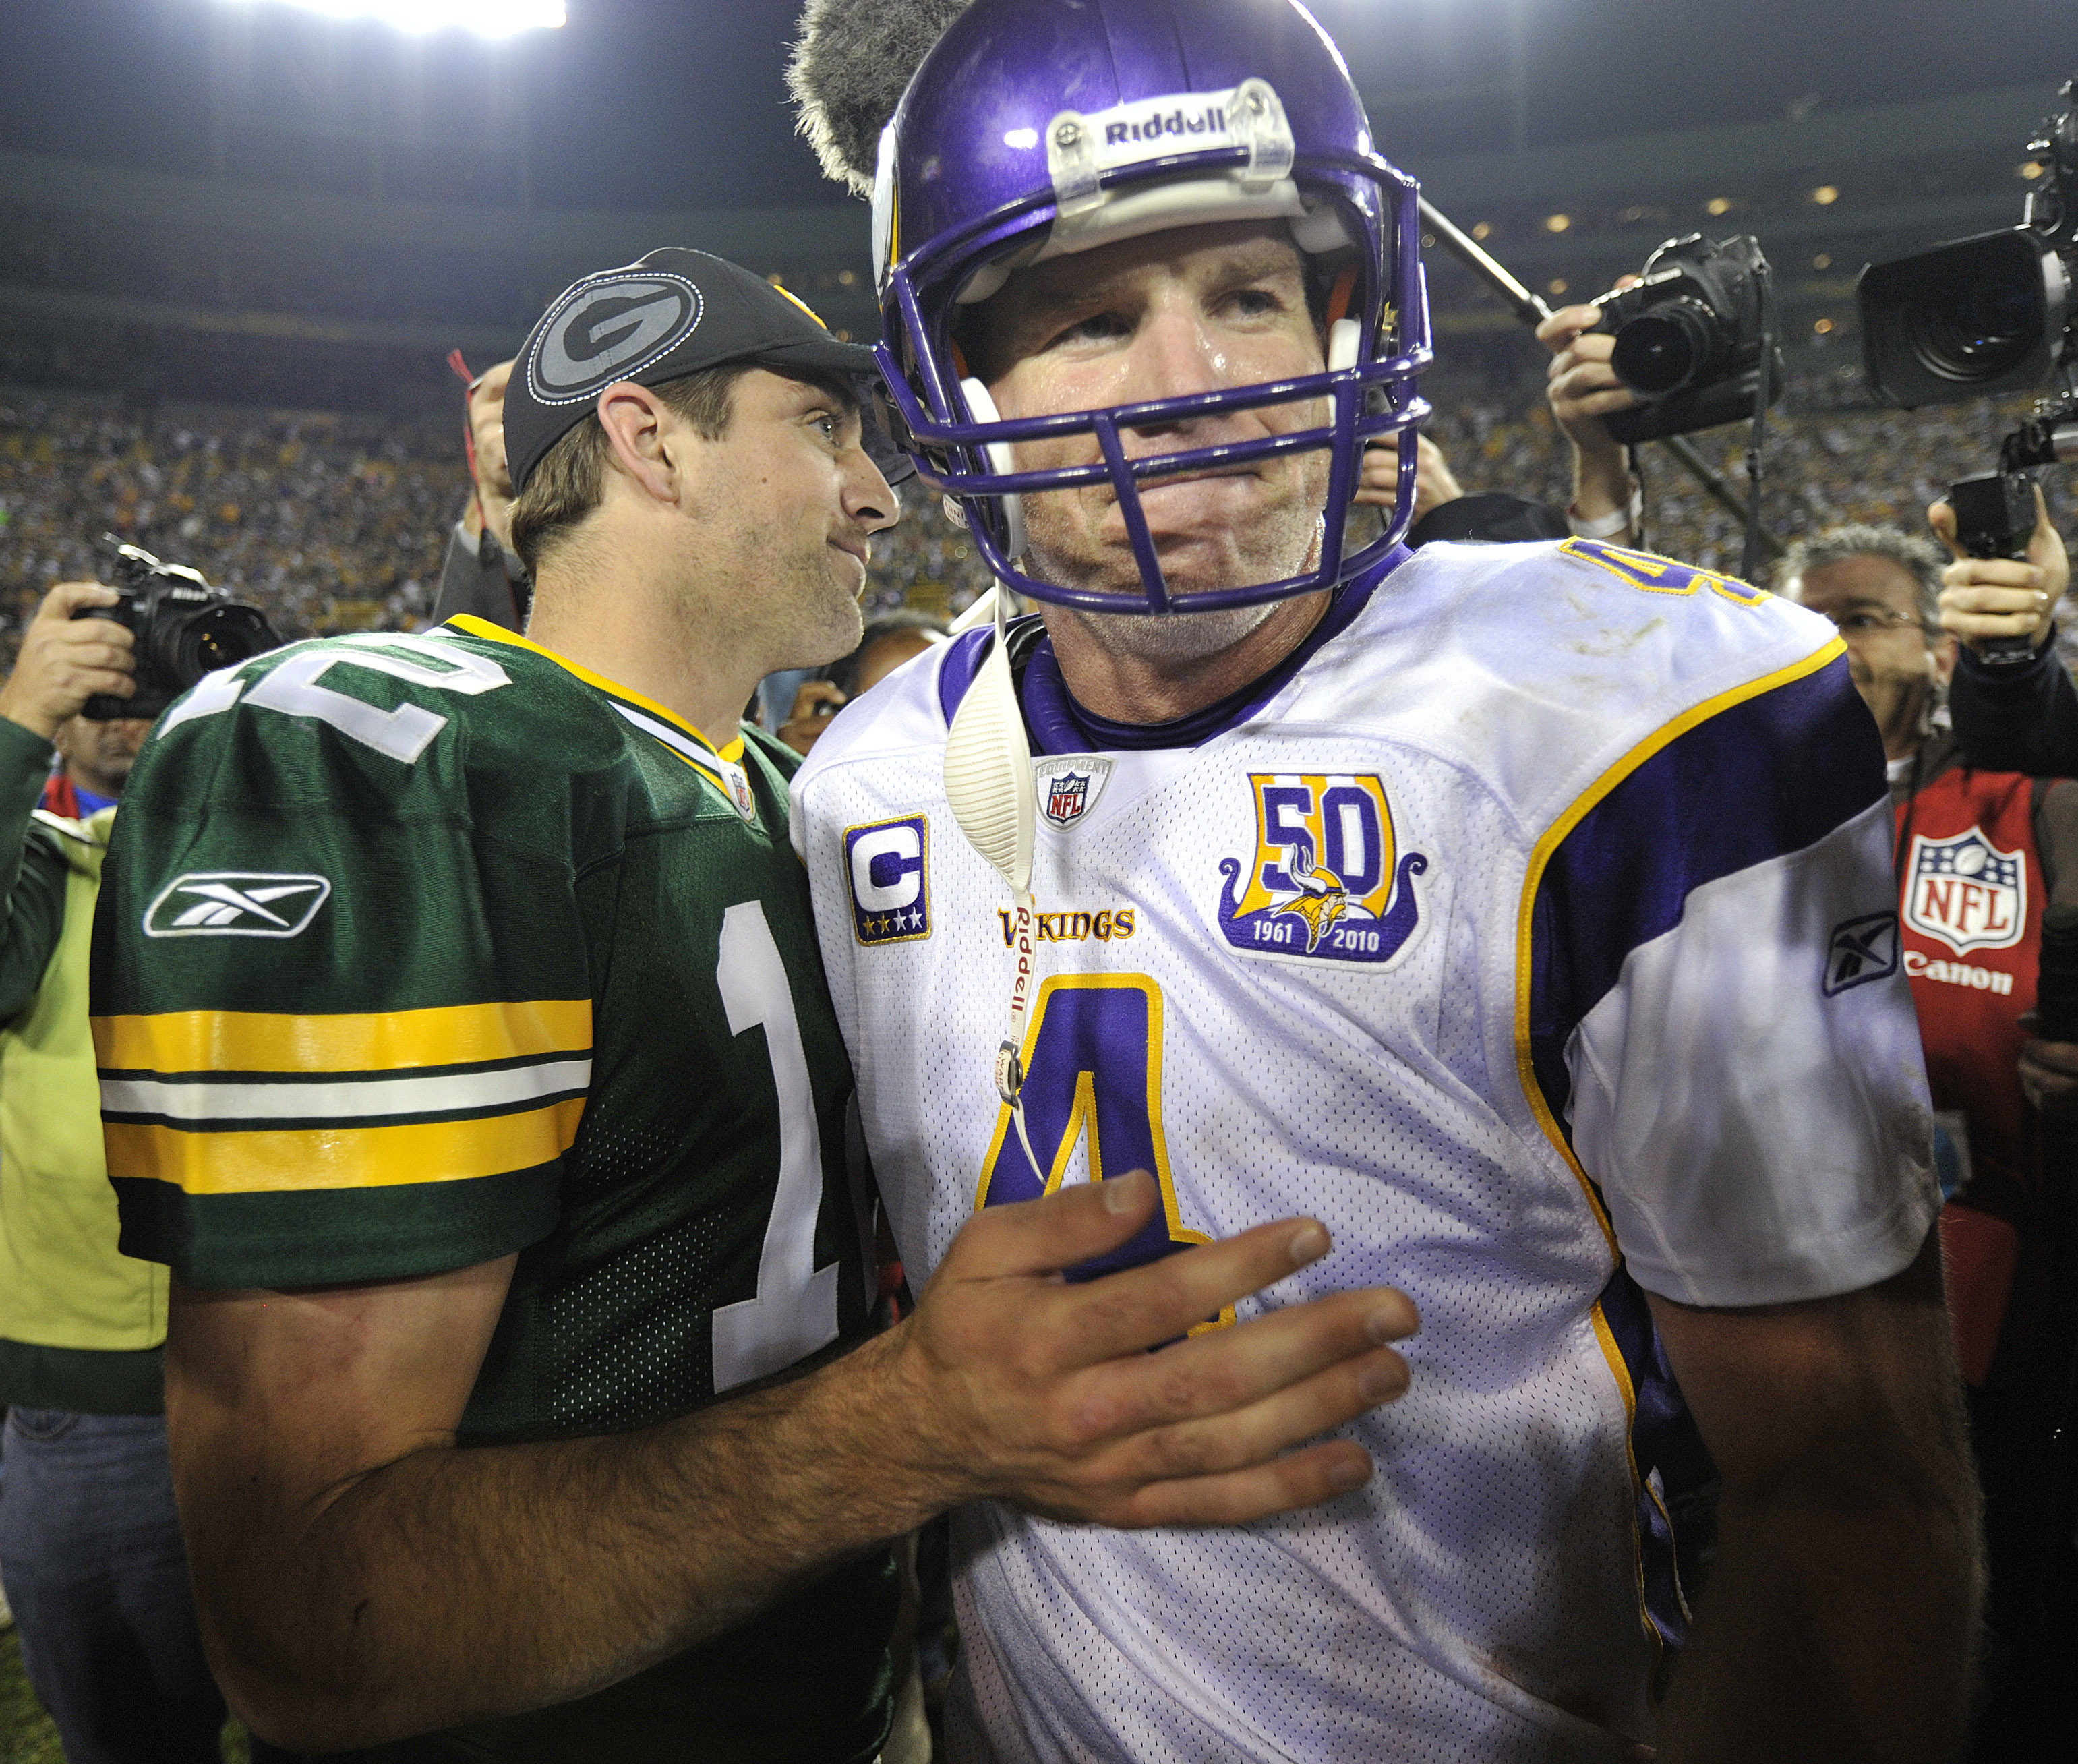 GREEN BAY, WI - OCTOBER 24: Aaron Rodgers #12 of the Green Bay Packers meets with Brett Favre #4 of the Minnesota Vikings after the Packers defeated the Vikings 28-24 at Lambeau Field on October 24, 2010 in Green Bay, Wisconsin. (Photo by Jim Prisching/Ge